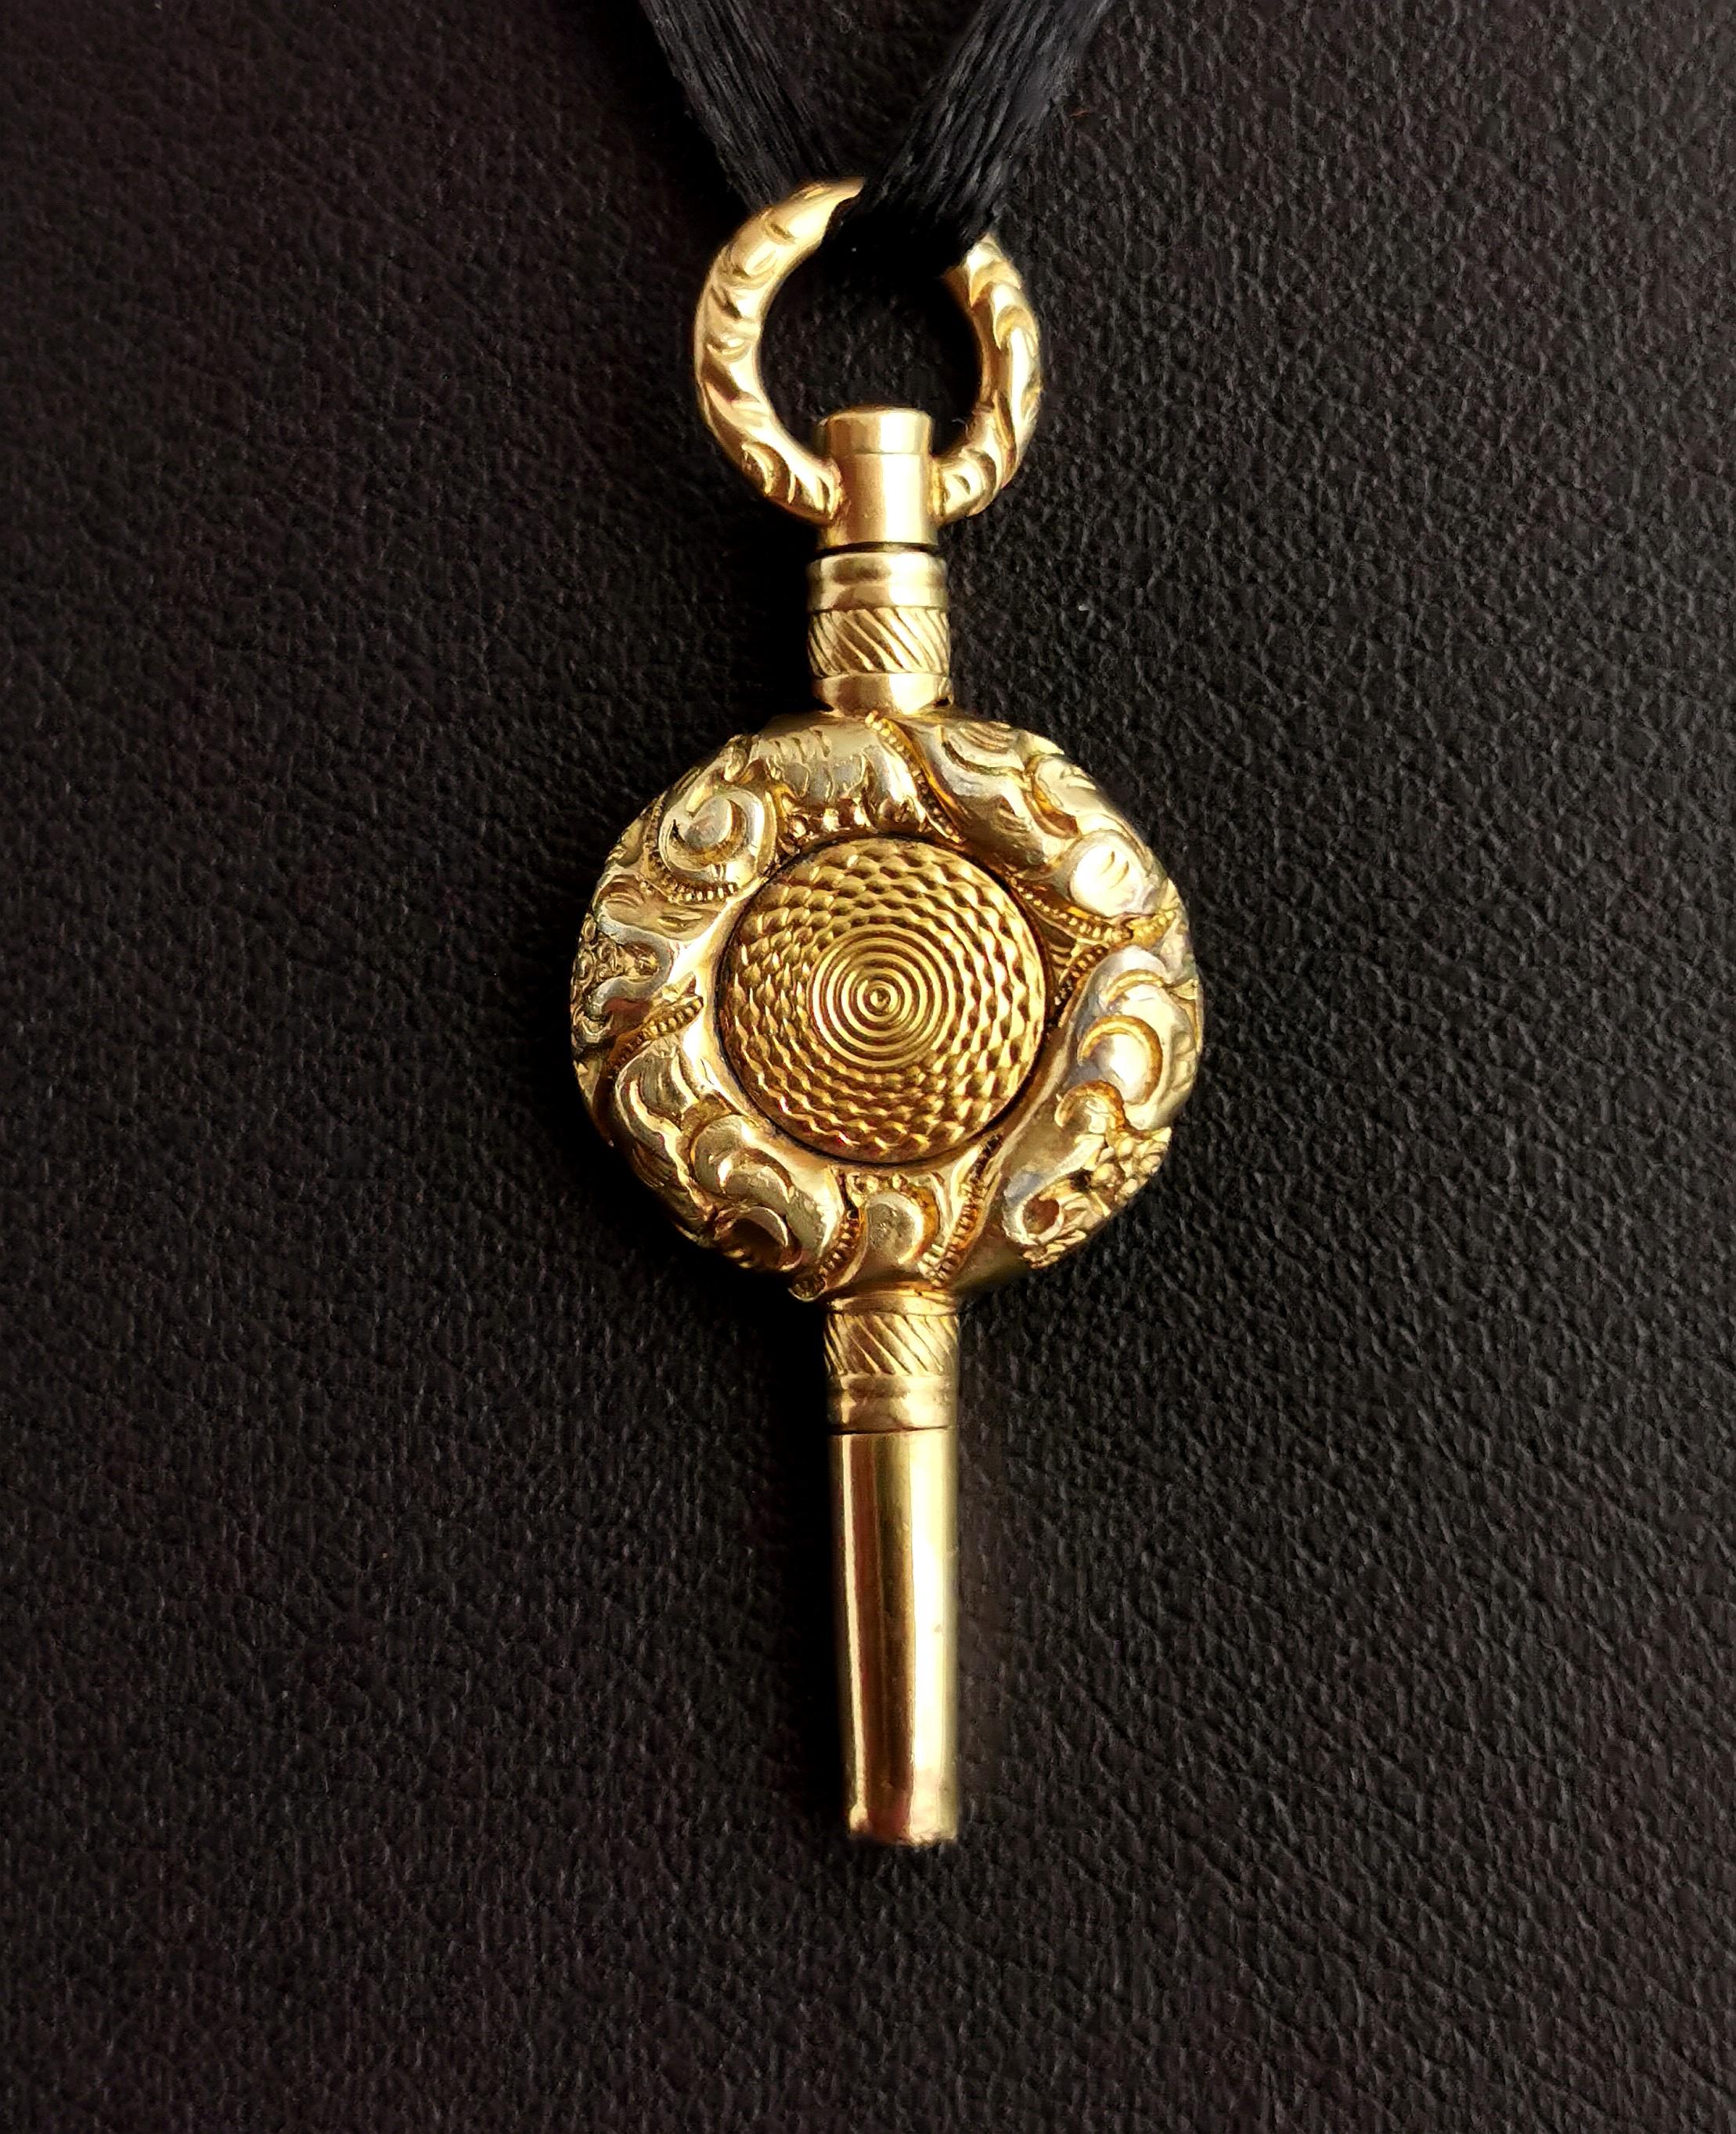 A charming antique, late Georgian era pocket watch key.

A good sized key with an engraved closed centre and a heavily chased and engraved rim and bow / bale.

It is a rich gold colour, 18kt yellow gold plated this key makes for a lovely pendant and